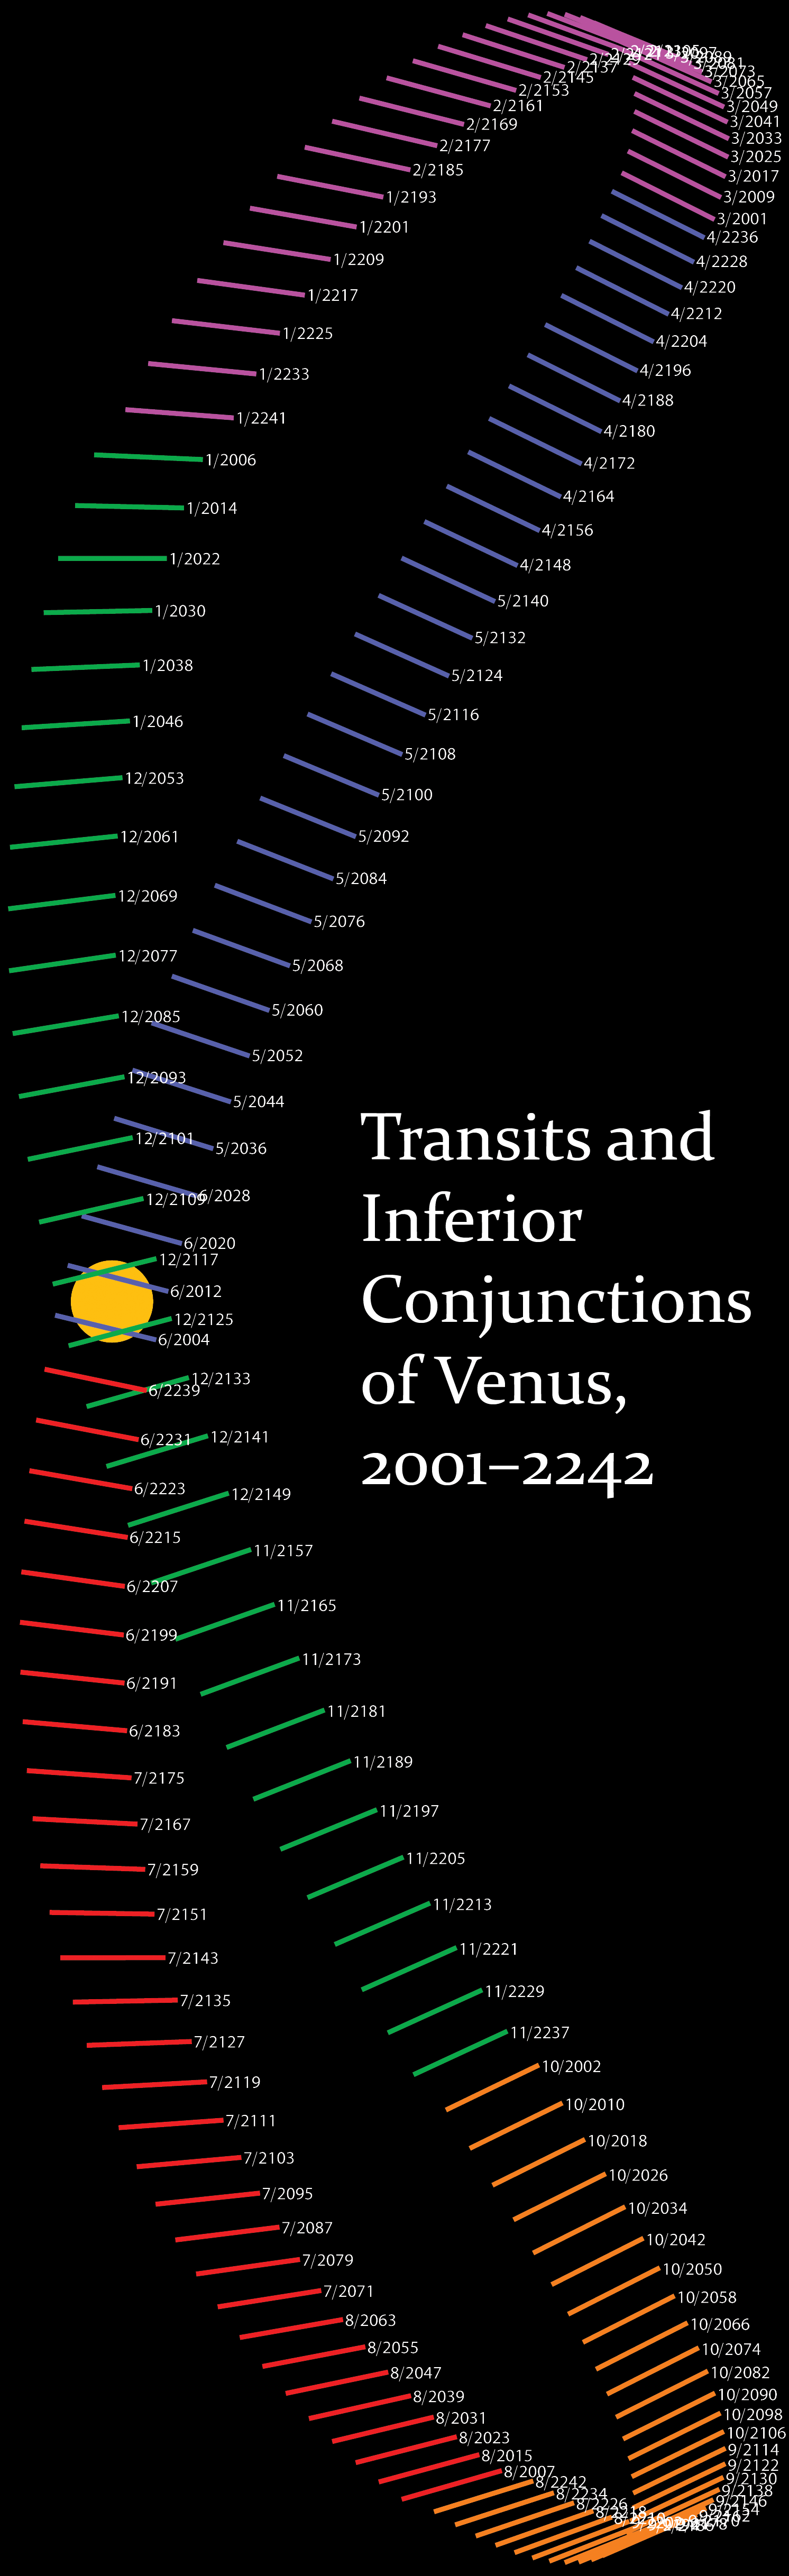 Transits and Inferior Conjunctions of Venus, 2001-2242